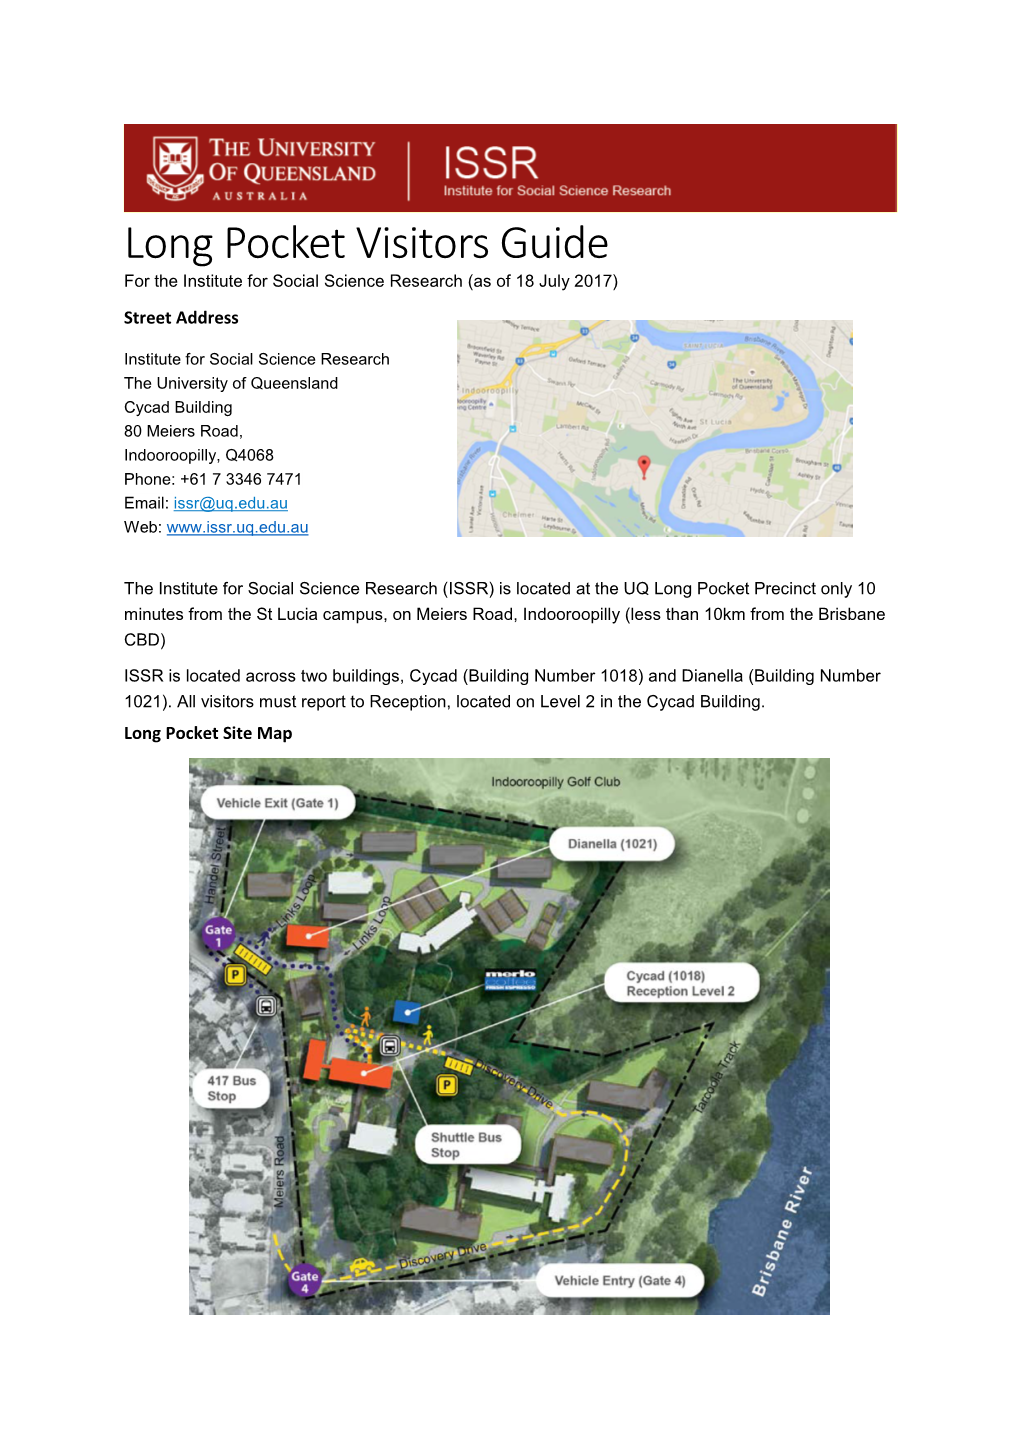 Long Pocket Visitors Guide for the Institute for Social Science Research (As of 18 July 2017) Street Address